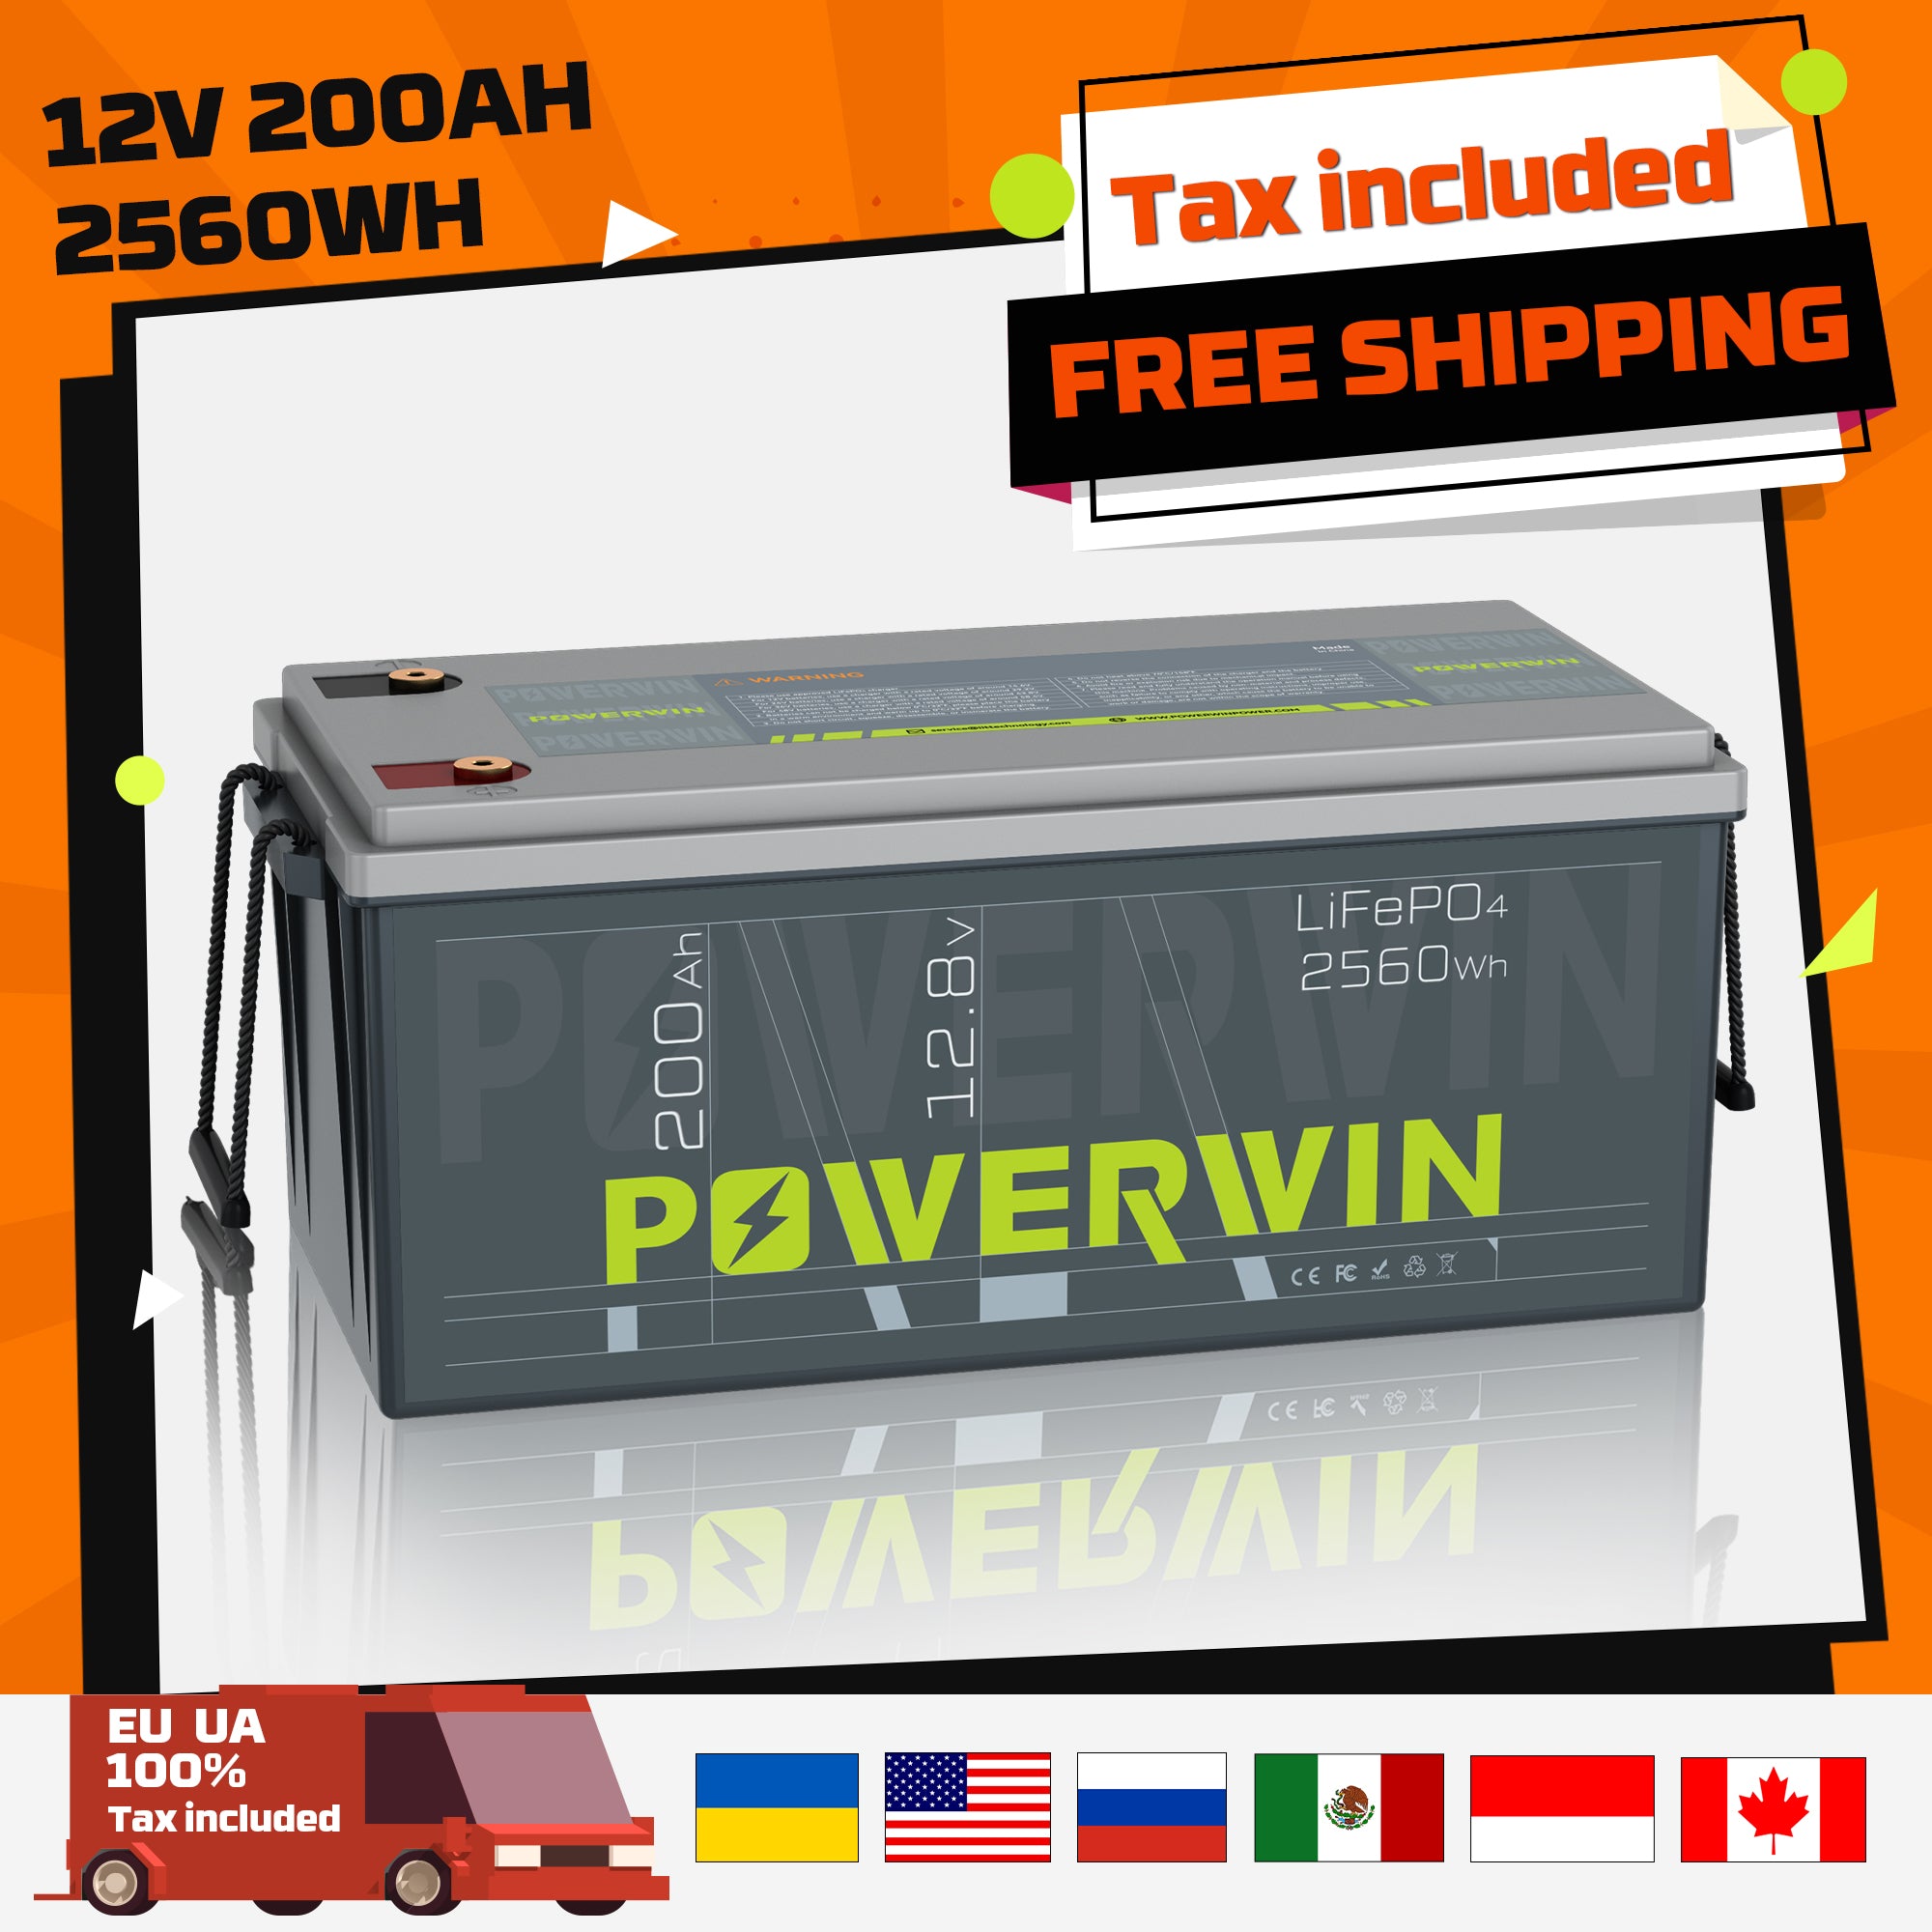 POWERWIN BT200 12V 200Ah 2560Wh LiFePO4 Lithium Battery